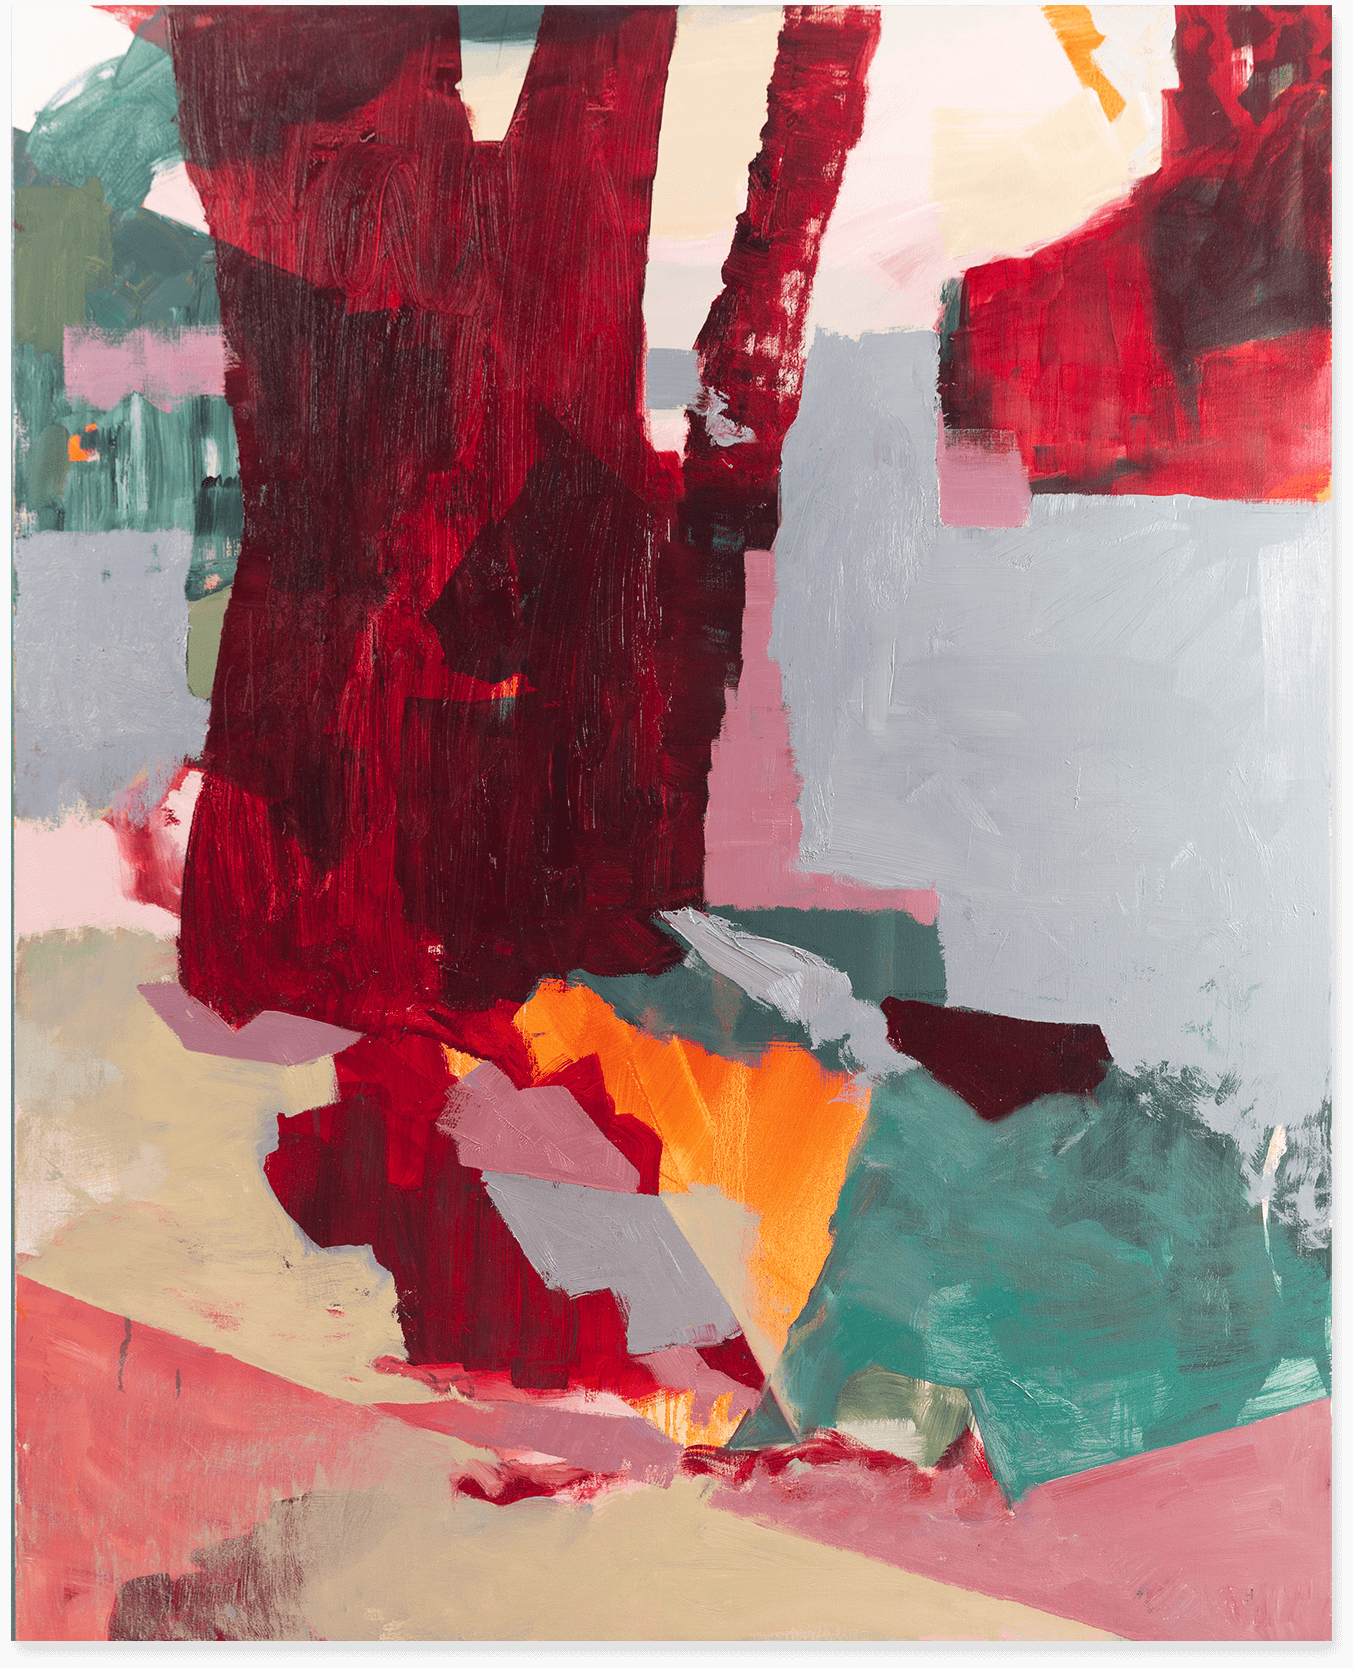 An abstract oil painting in transparent red, green, tans and orange